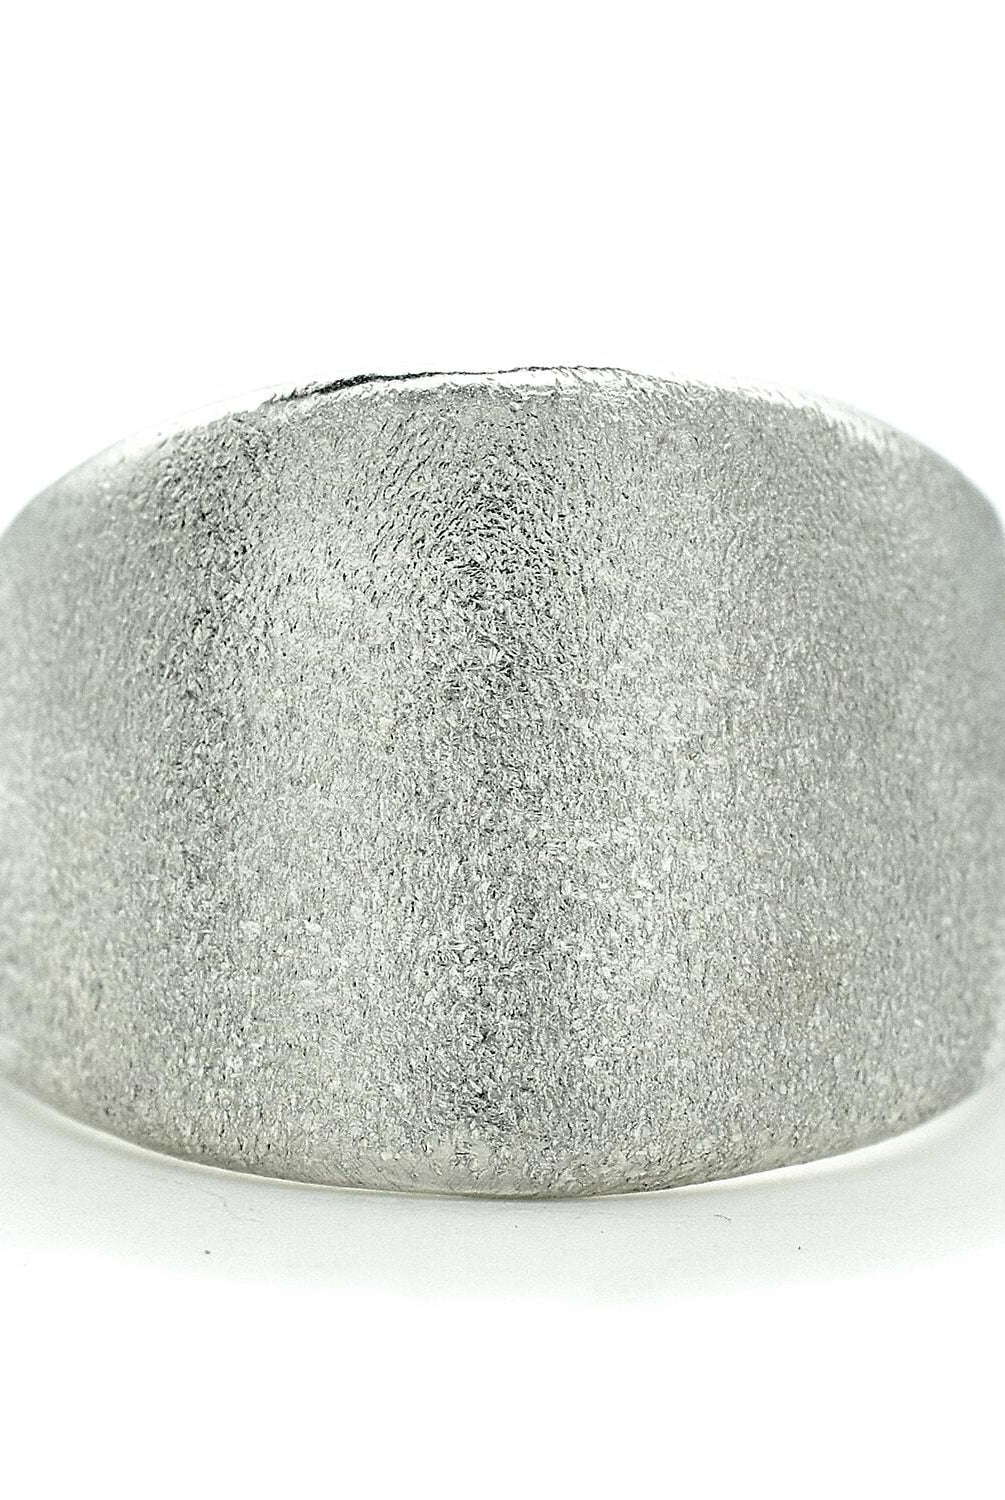 Textured Sterling Band-Rings-Vixen Collection, Day Spa and Women's Boutique Located in Seattle, Washington